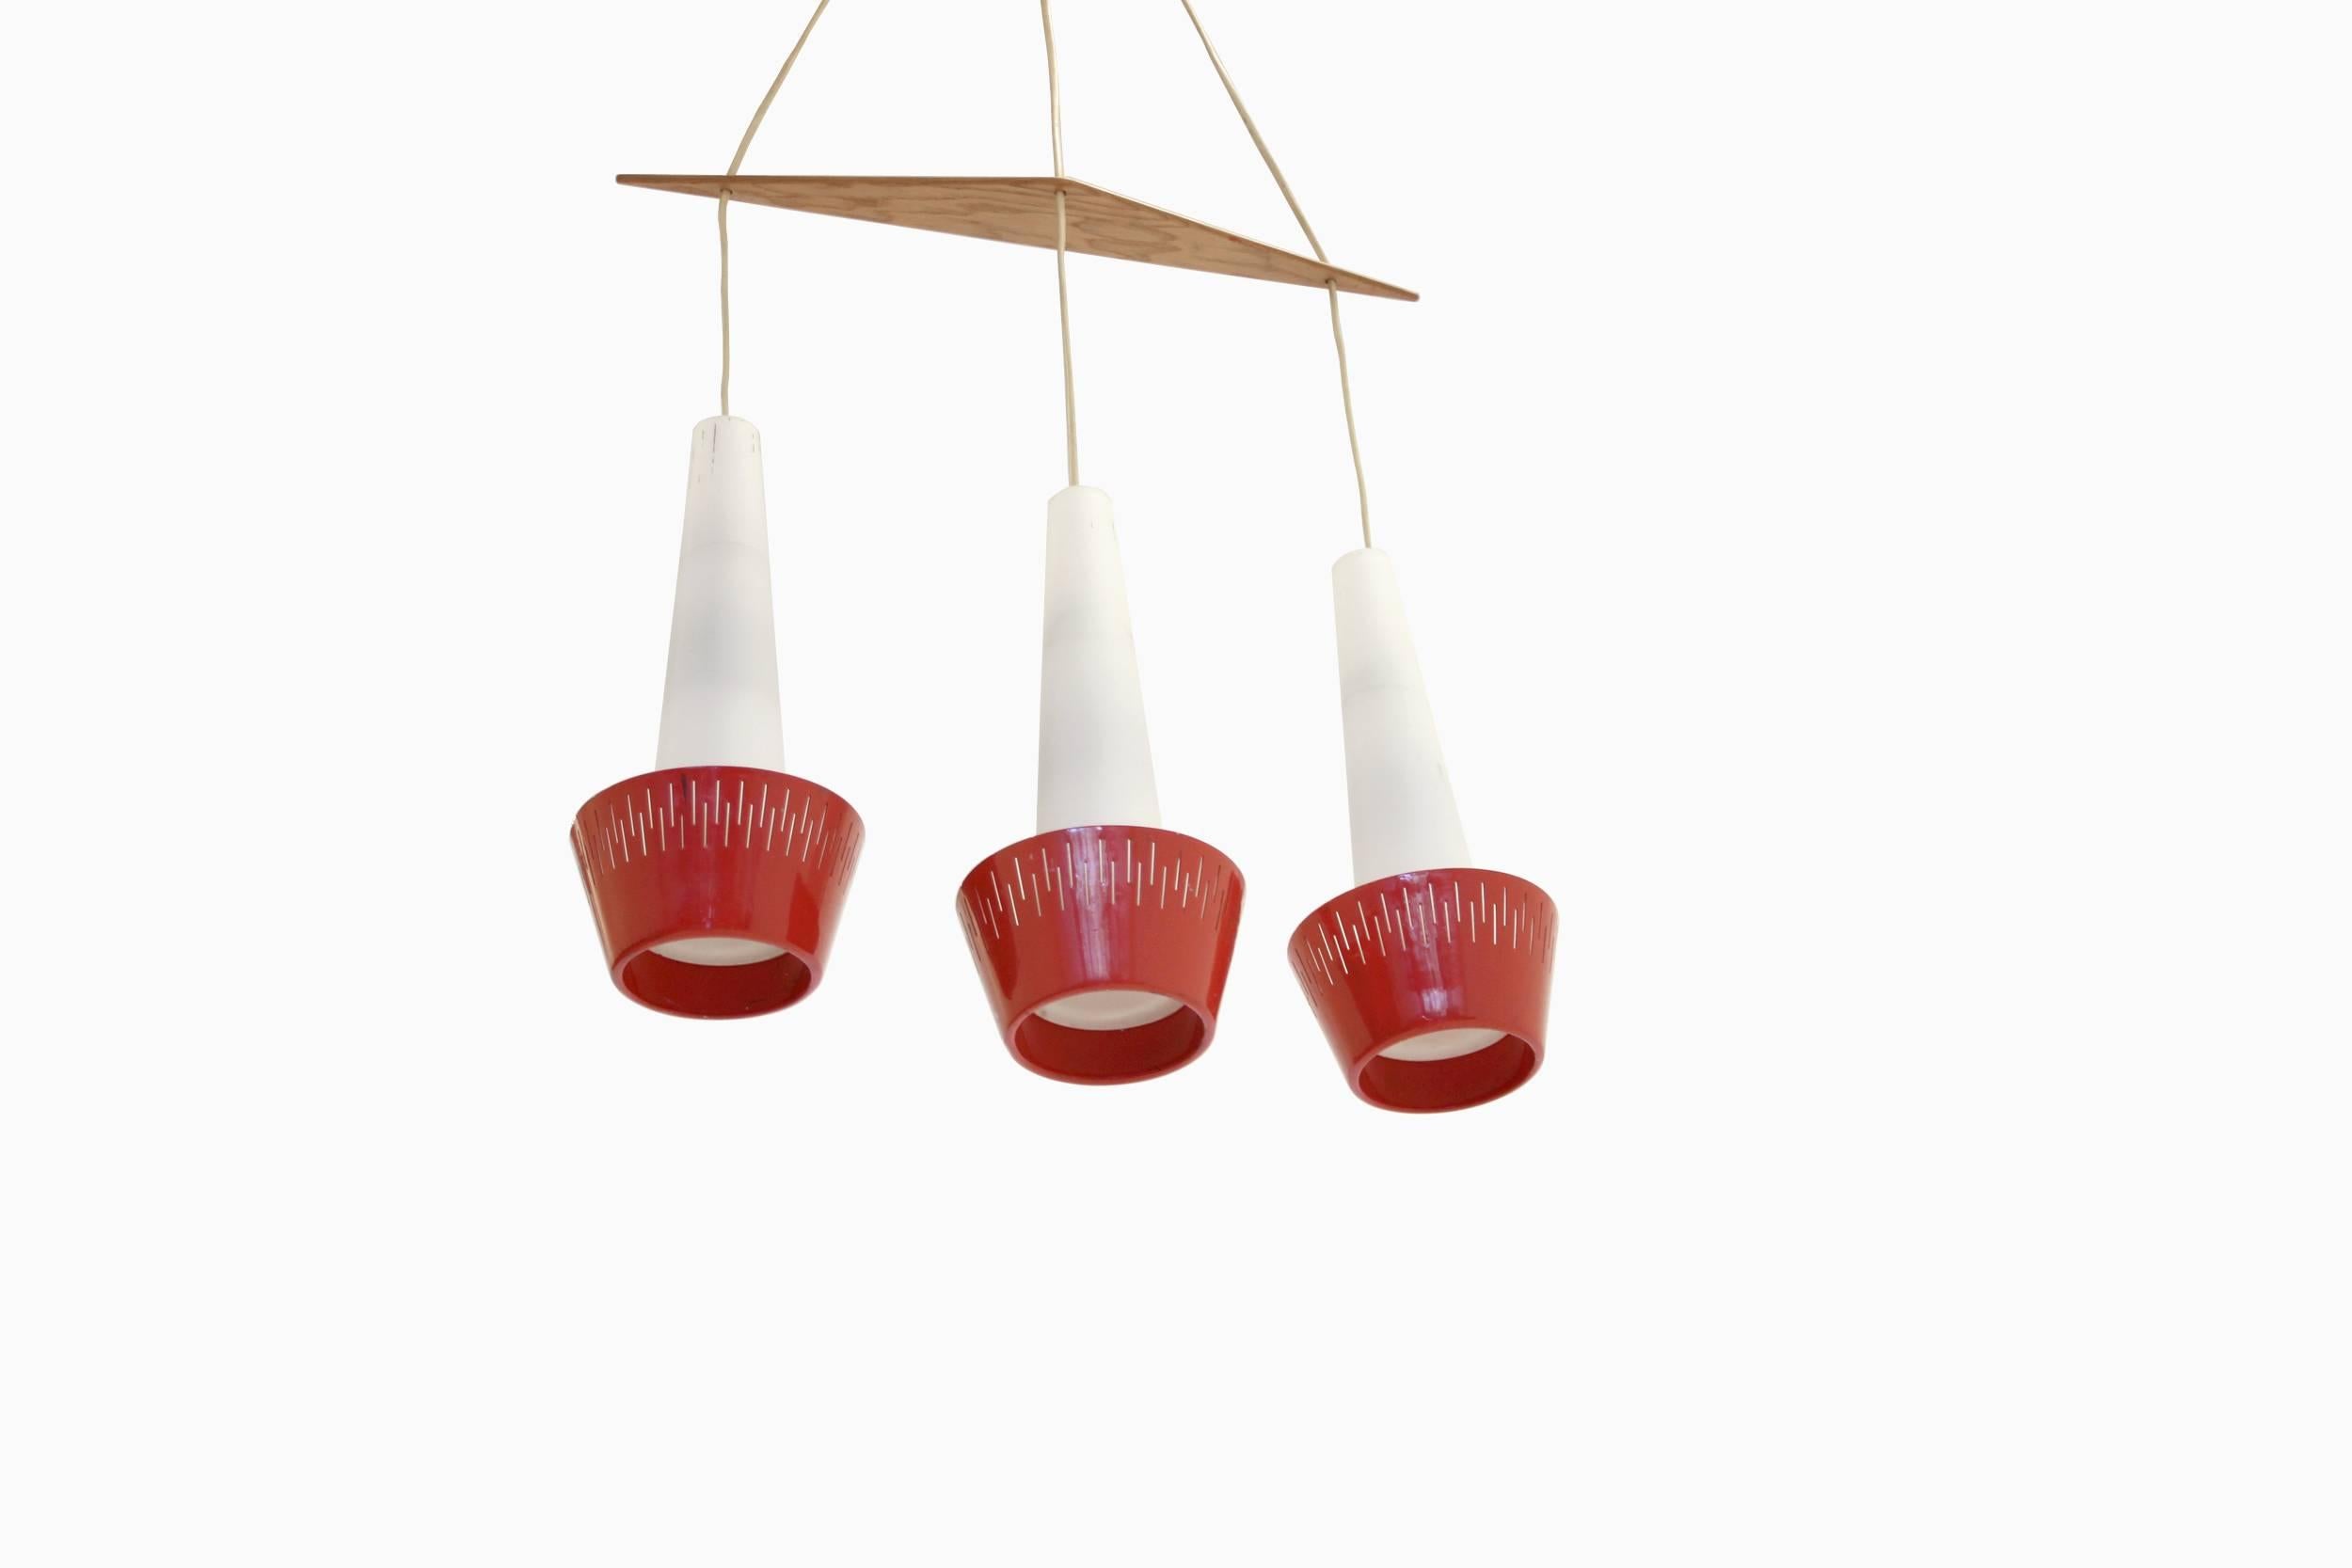 Decorative pendant lamps steel, wood and opaline glass. Most likely designed and manufactured in Sweden by ASEA from circa 1960s second half. The lamps are fully working and in excellent vintage condition.